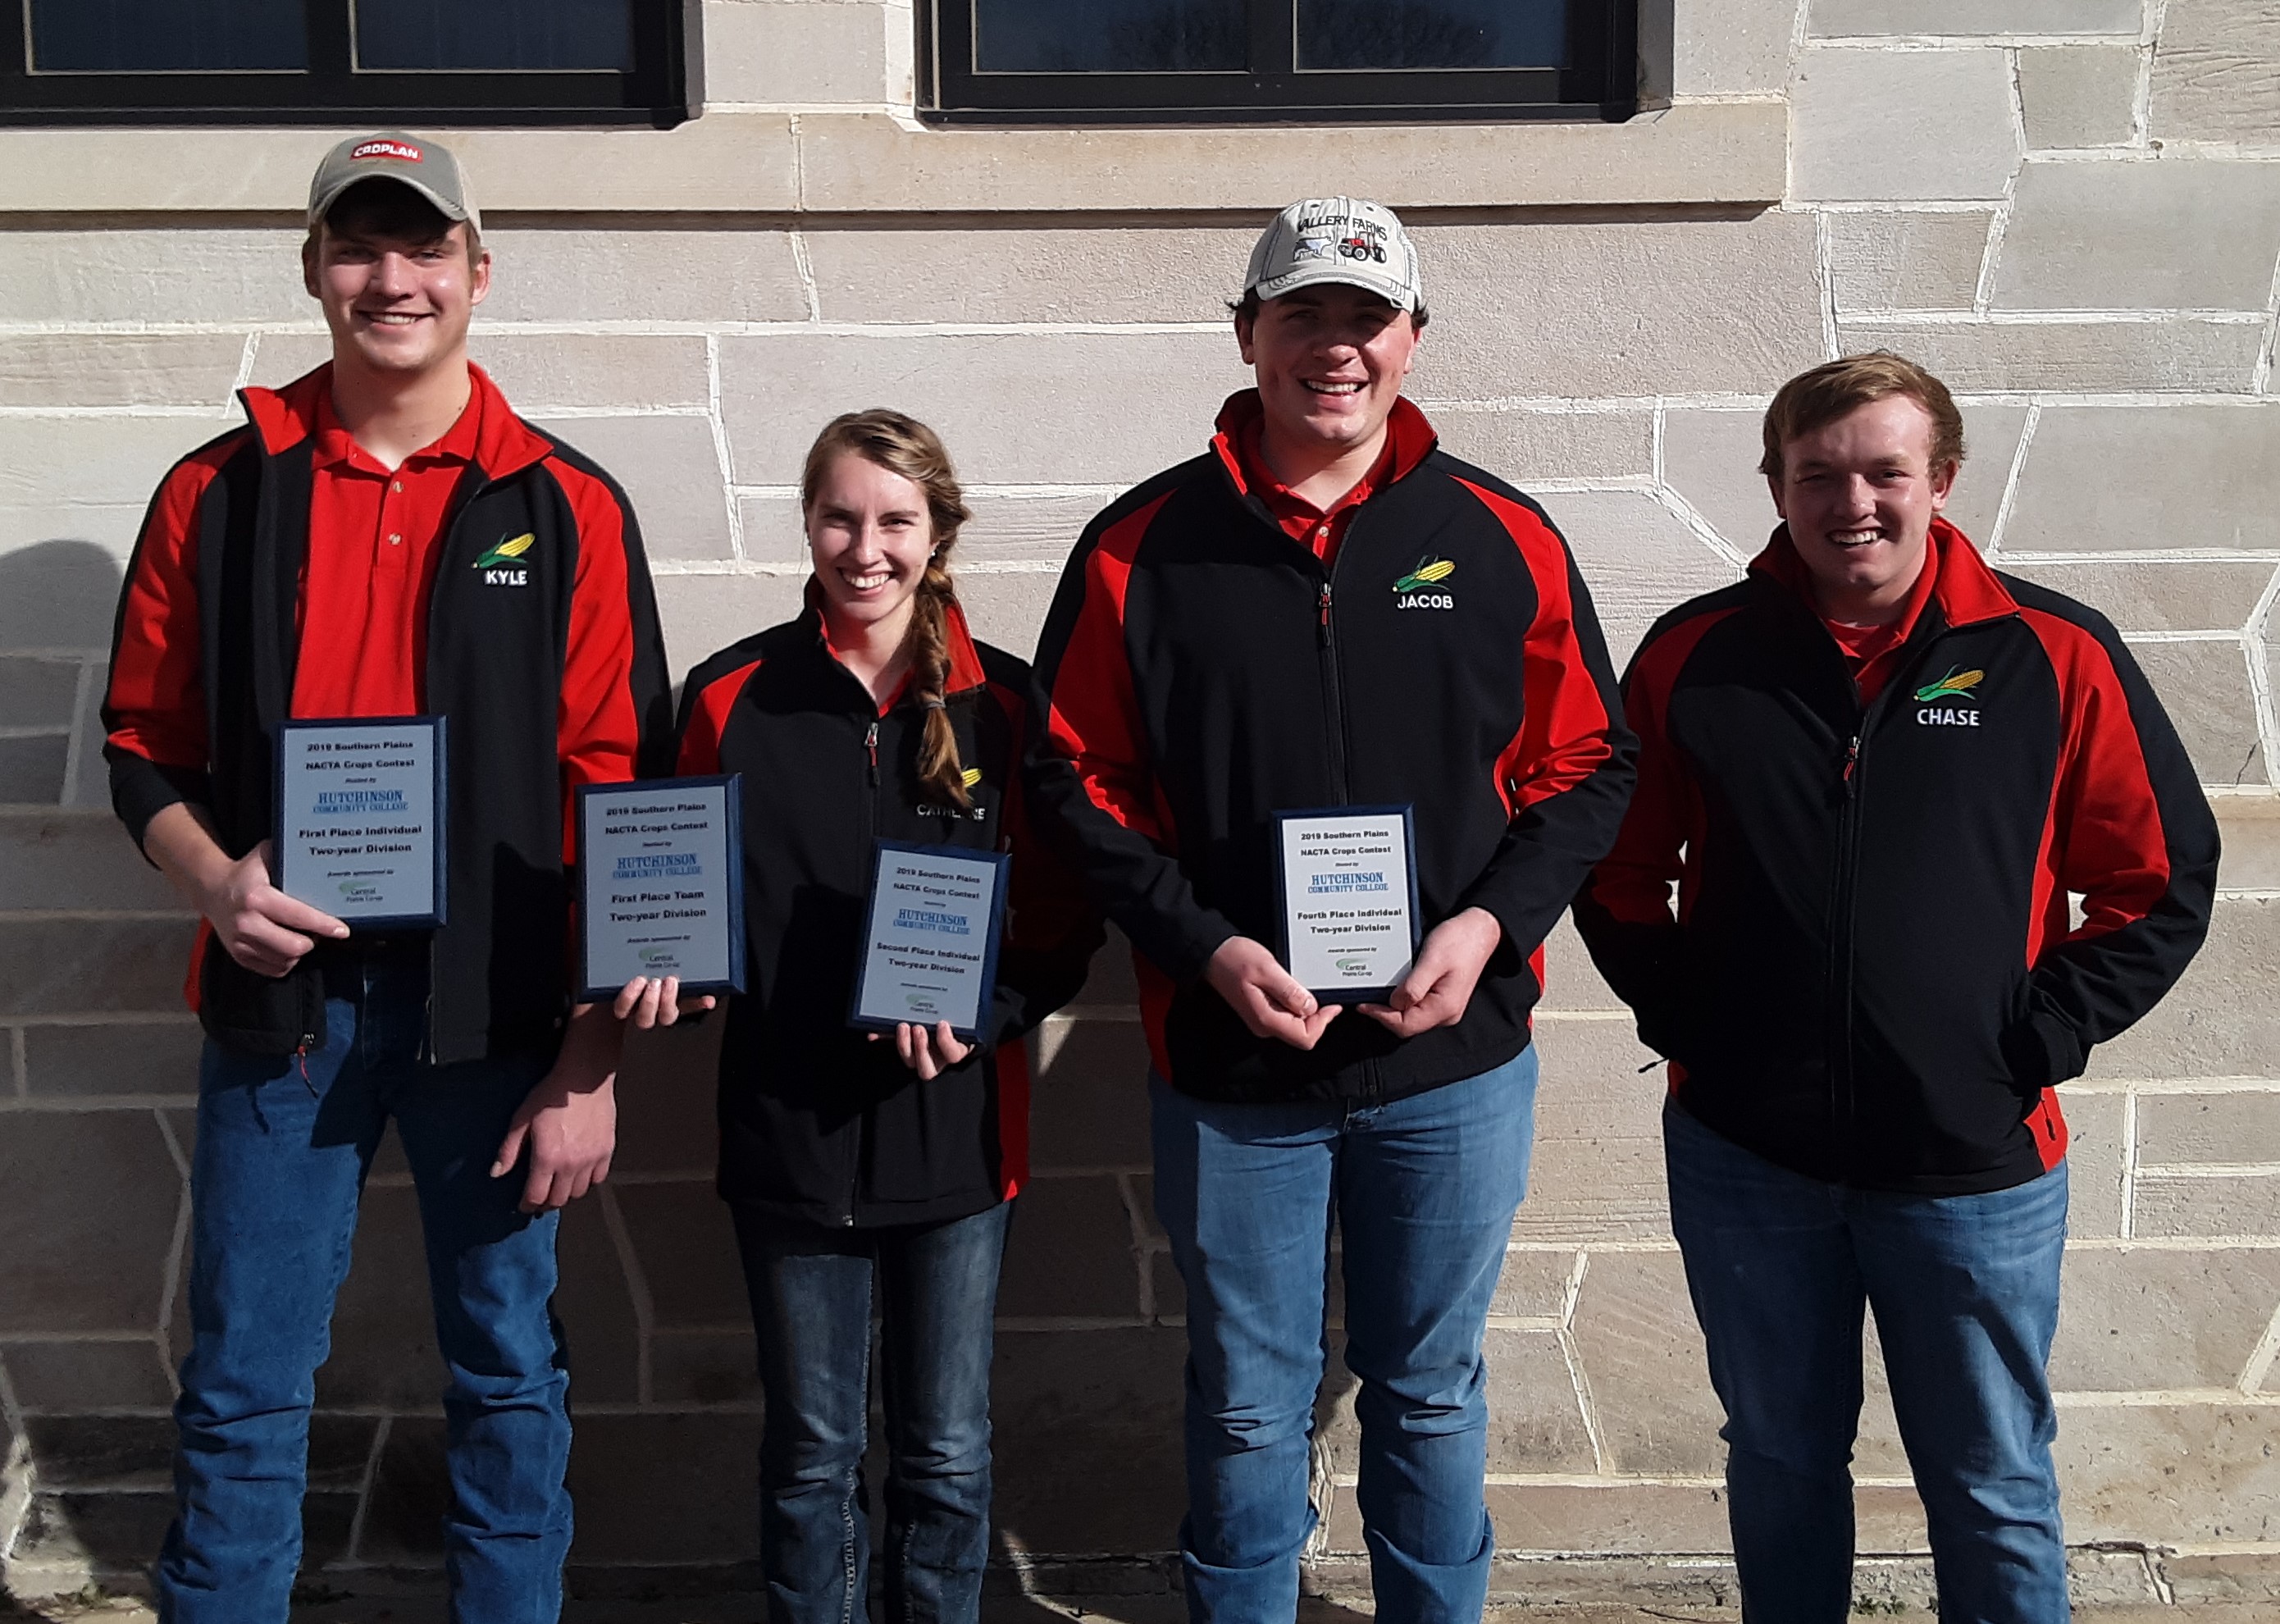 The NCTA Aggie Crops Judging Team took top honors Saturday in a contest among 2-year colleges. The team won first place and individual members ranked in the top seven placings. (From left) 1st place, Kyle Krantz, Alliance; 2nd, Catherine Lundggren, rural Hamilton County (Harvard); 4th, Jacob Vallery, Plattsmouth; and 7th, Chase Callahan, Gothenburg. (Ramsdale / NCTA Photo)